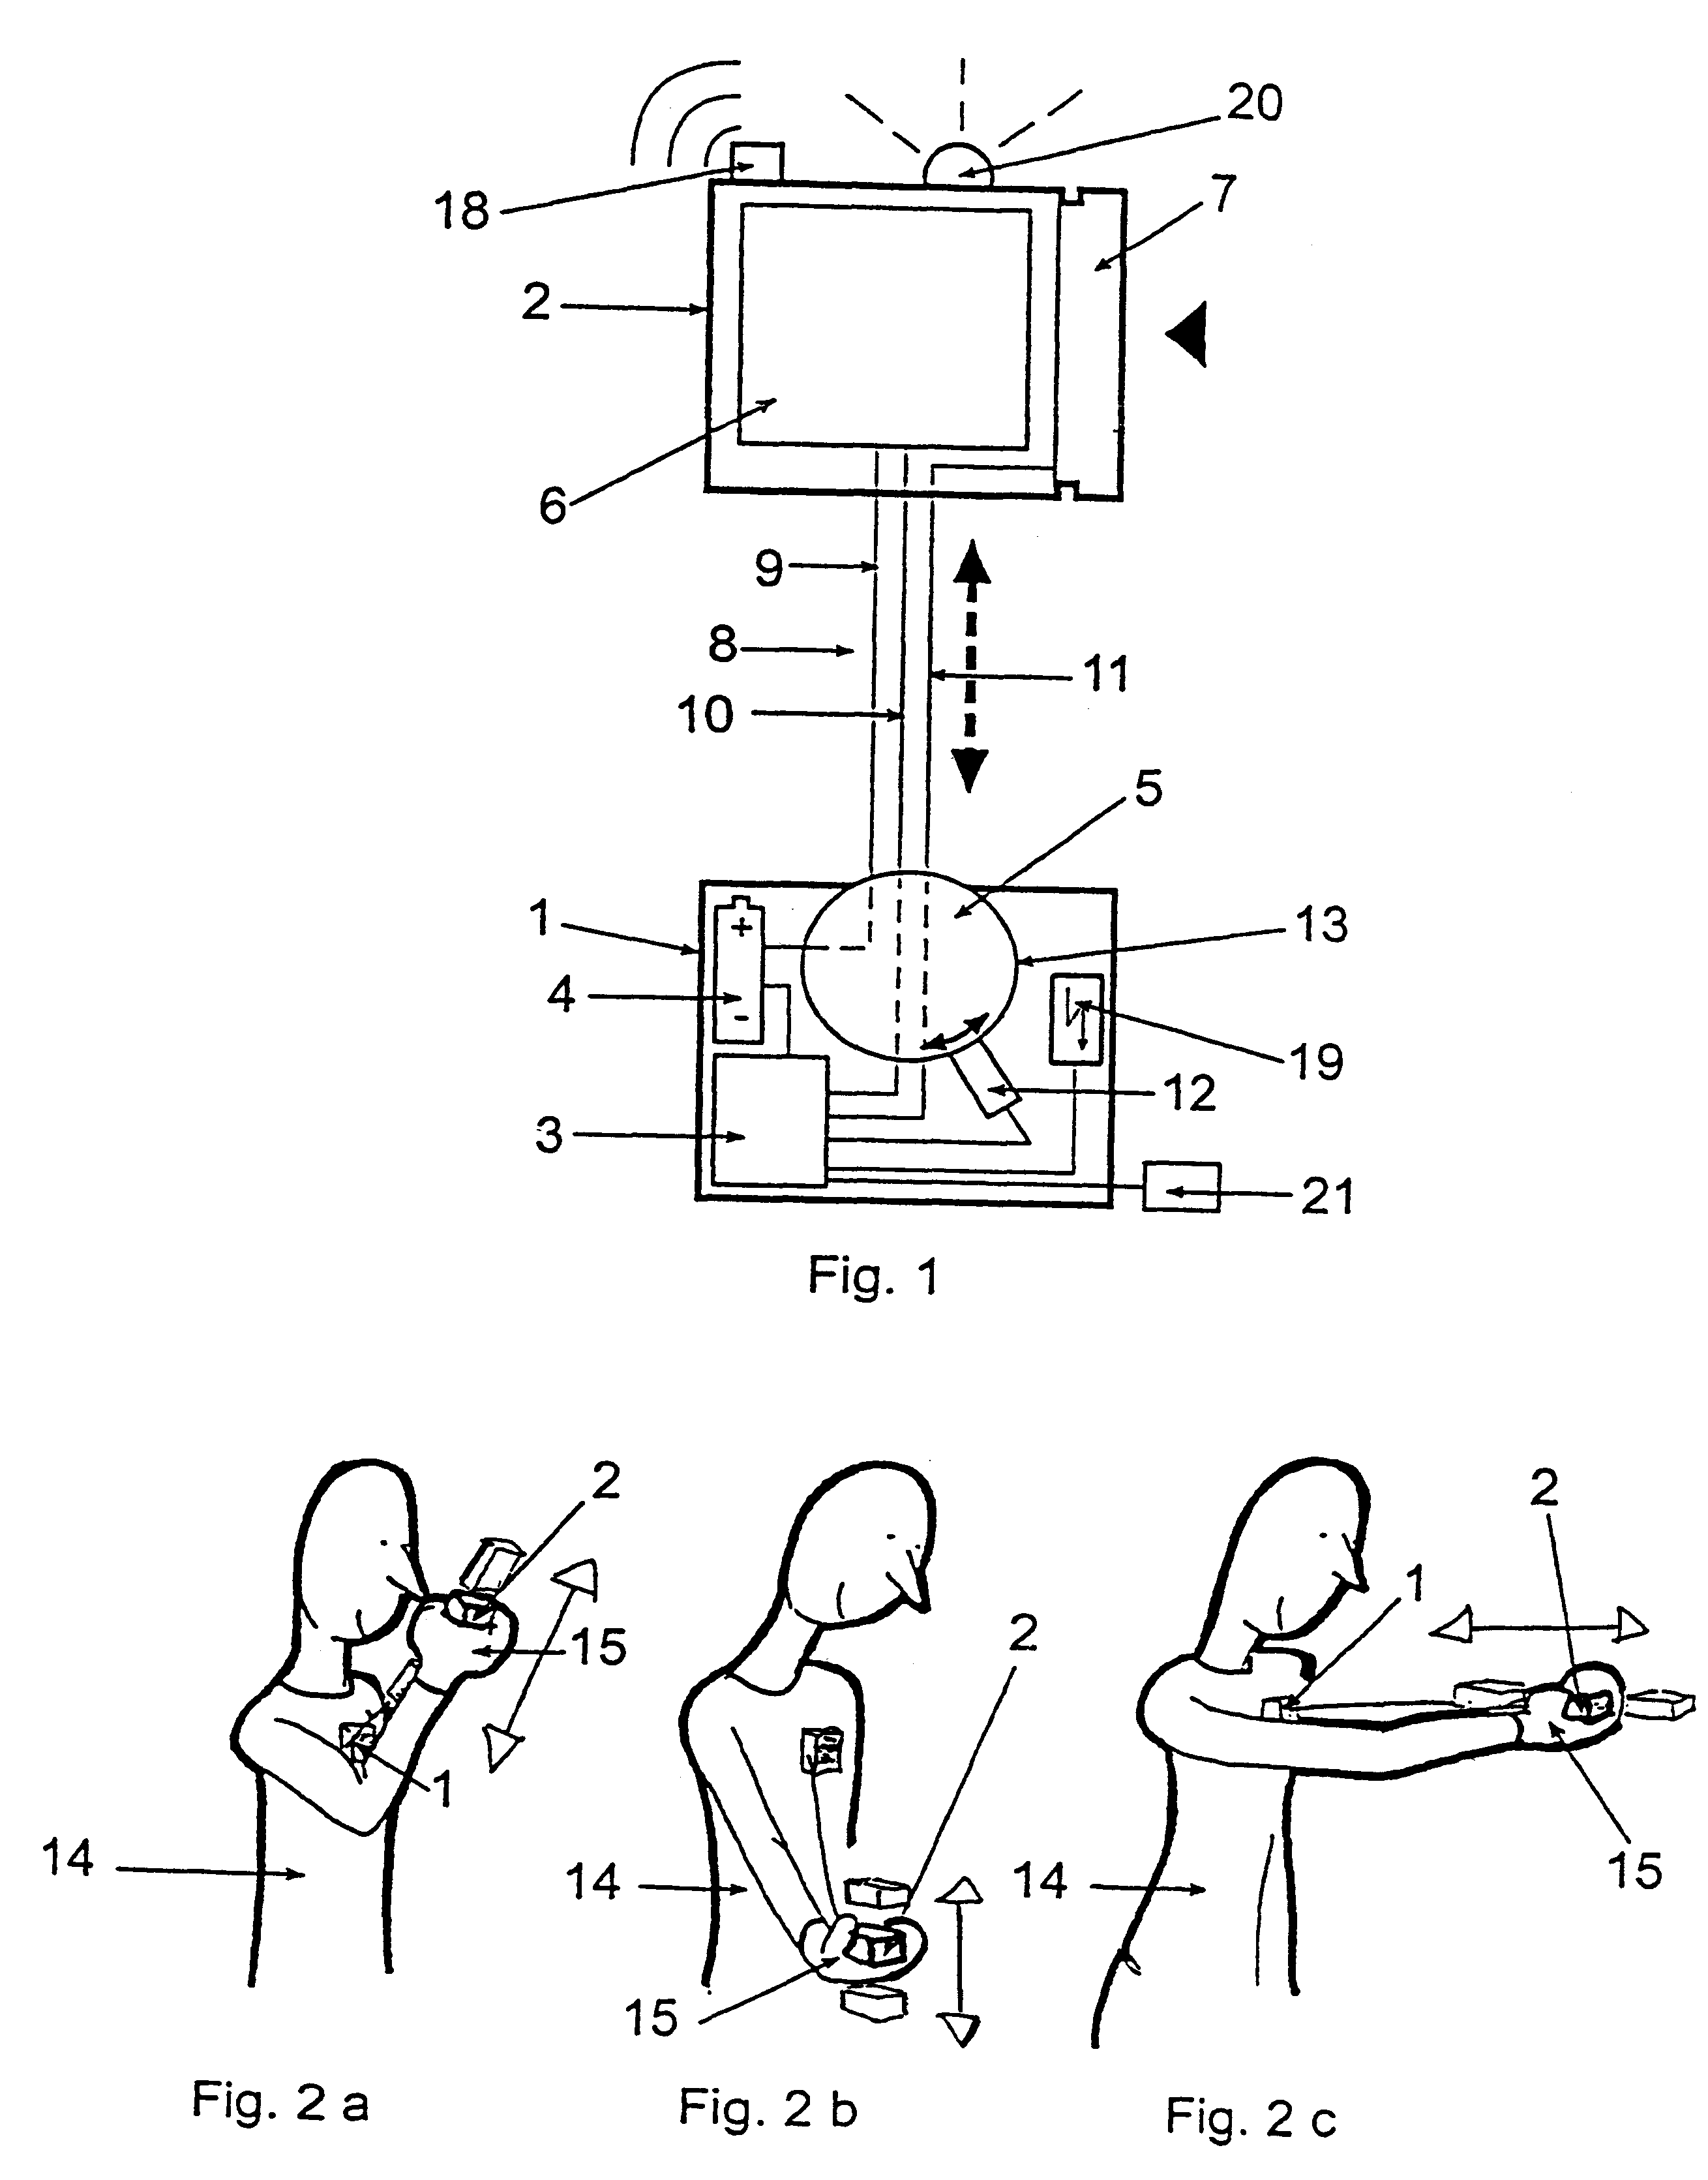 User interface for selecting functions in an electronic hardware